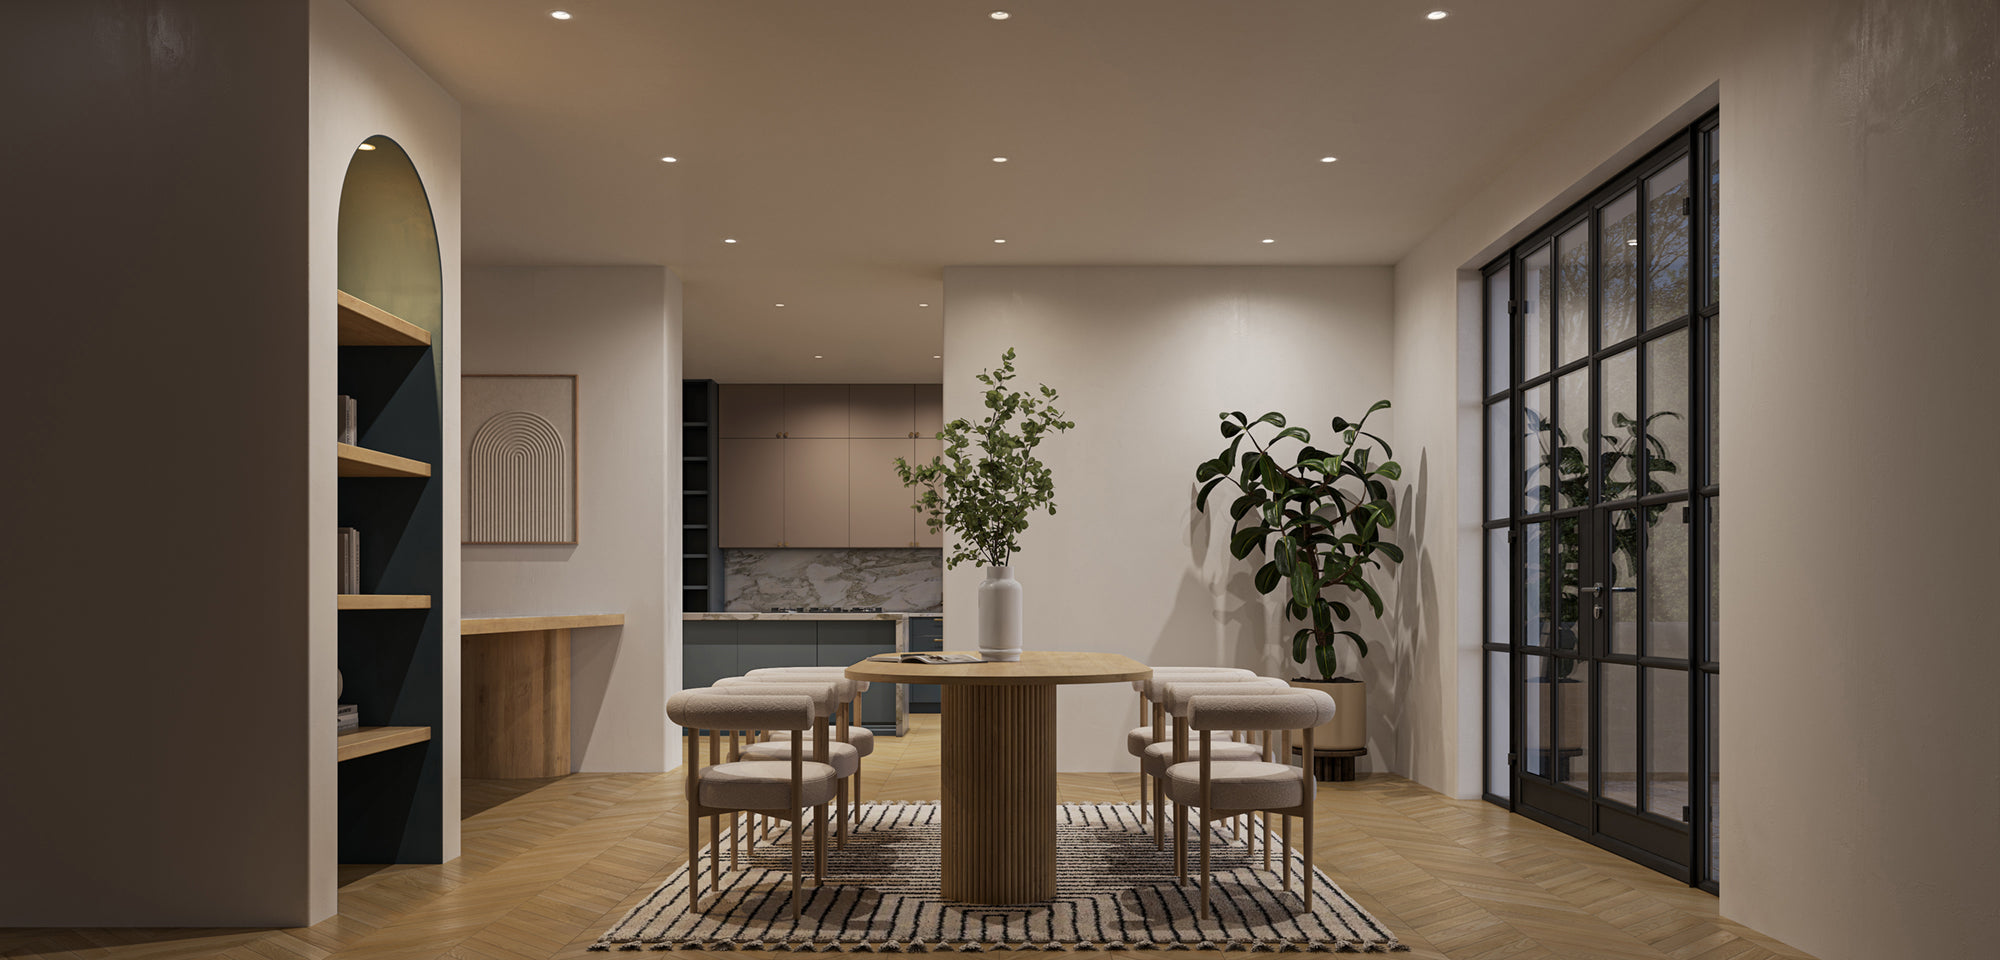 LUSA premium LED lighting in kitchen and dining area